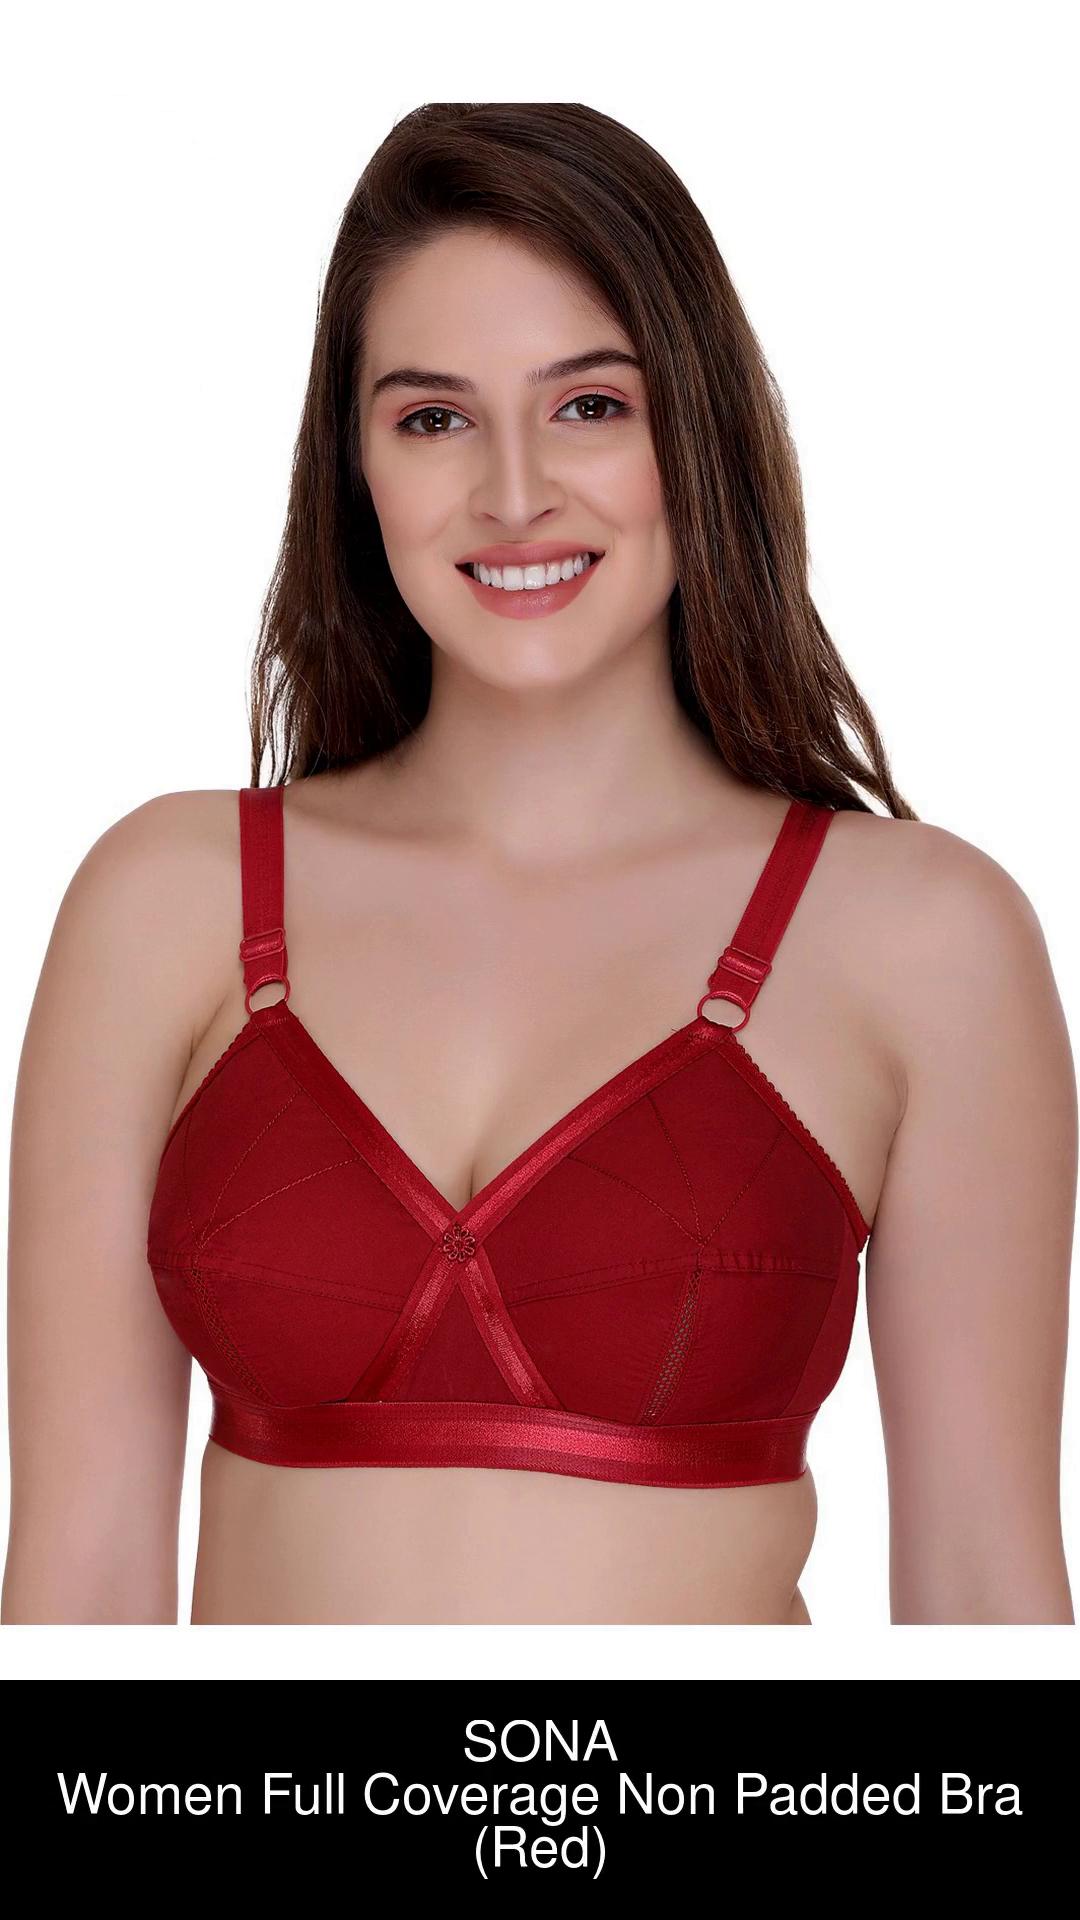 Sona 30 Size Bra - Get Best Price from Manufacturers & Suppliers